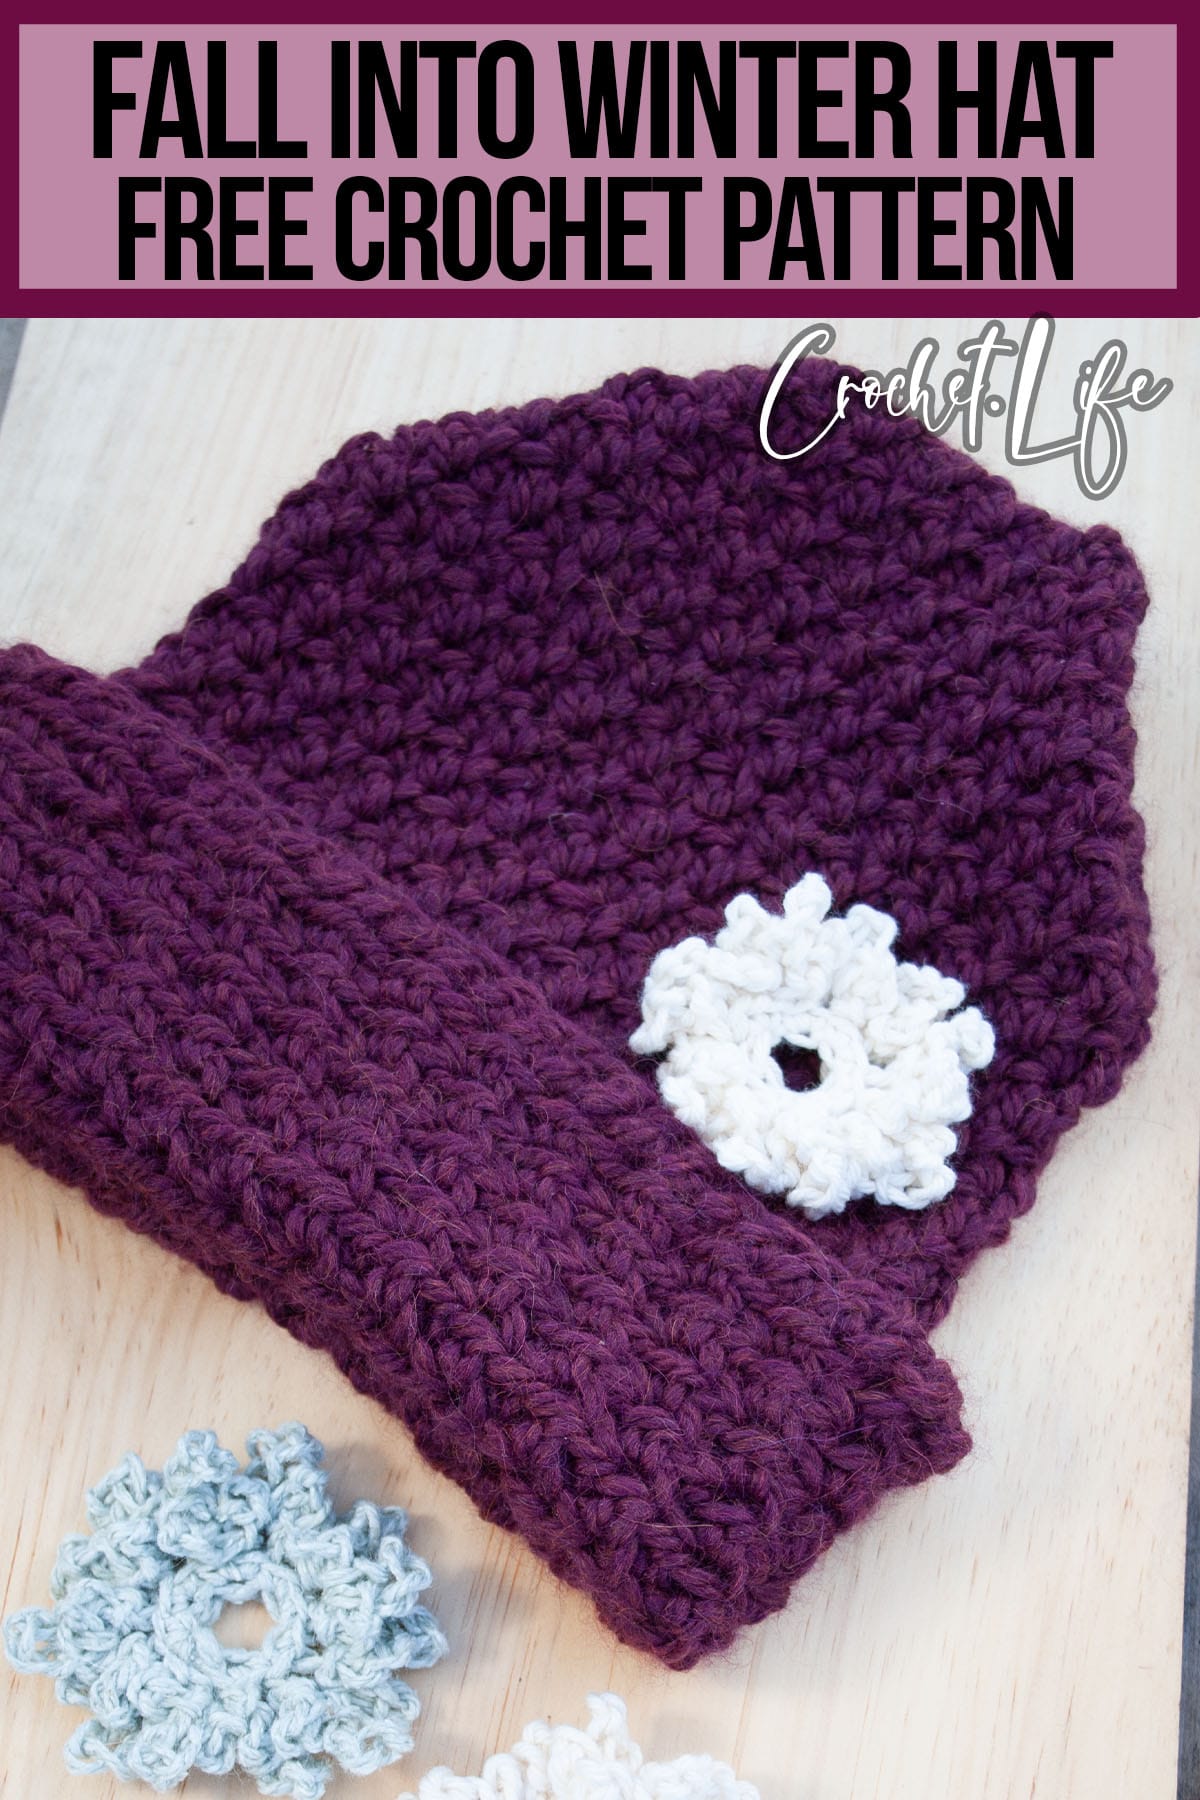 crochet pattern fall into winter hat with text which reads fall into winter hat free crochet pattern